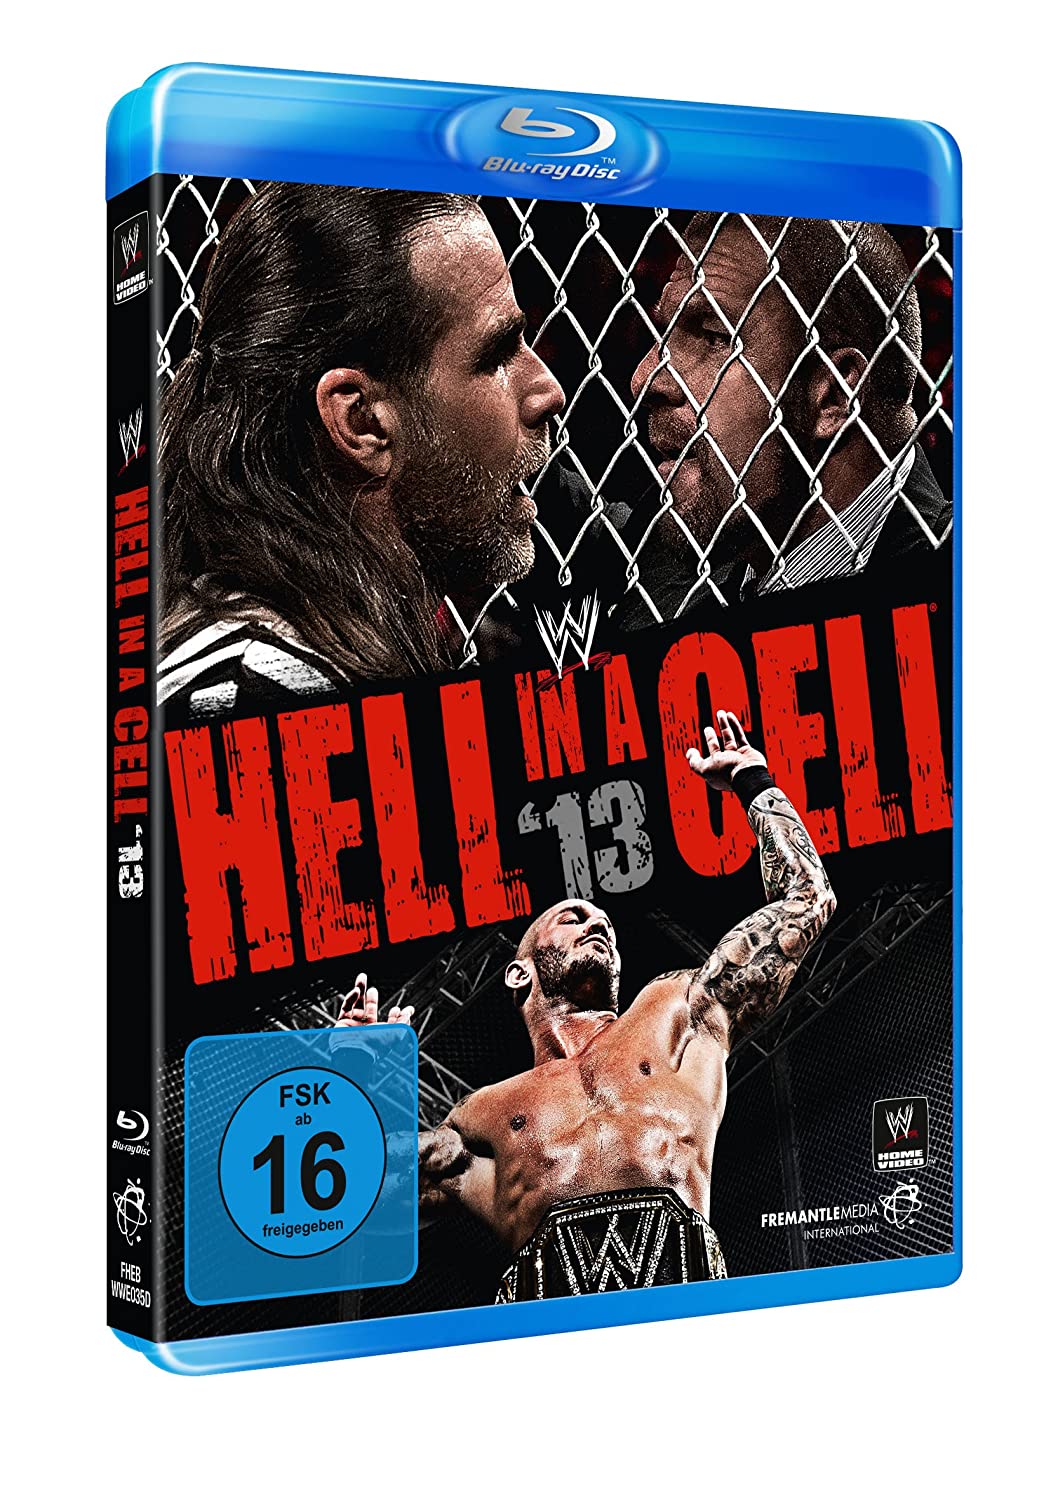 WWE - Hell In A Cell 2013